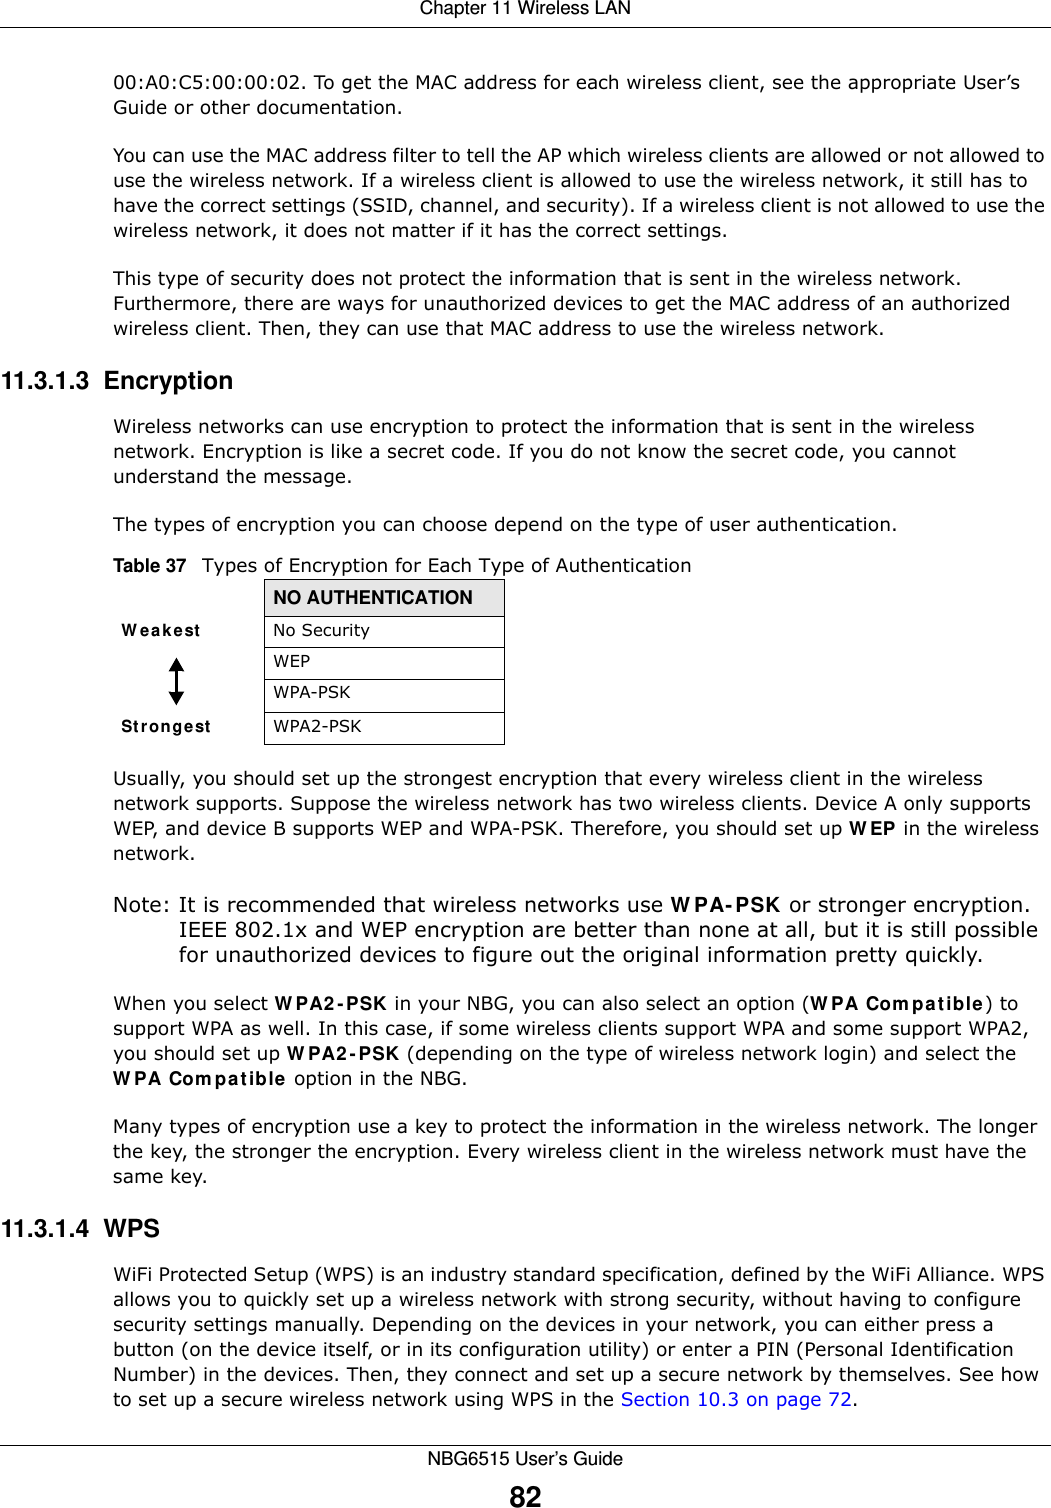 Chapter 11 Wireless LANNBG6515 User’s Guide8200:A0:C5:00:00:02. To get the MAC address for each wireless client, see the appropriate User’s Guide or other documentation.You can use the MAC address filter to tell the AP which wireless clients are allowed or not allowed to use the wireless network. If a wireless client is allowed to use the wireless network, it still has to have the correct settings (SSID, channel, and security). If a wireless client is not allowed to use the wireless network, it does not matter if it has the correct settings.This type of security does not protect the information that is sent in the wireless network. Furthermore, there are ways for unauthorized devices to get the MAC address of an authorized wireless client. Then, they can use that MAC address to use the wireless network.11.3.1.3  EncryptionWireless networks can use encryption to protect the information that is sent in the wireless network. Encryption is like a secret code. If you do not know the secret code, you cannot understand the message.The types of encryption you can choose depend on the type of user authentication. Usually, you should set up the strongest encryption that every wireless client in the wireless network supports. Suppose the wireless network has two wireless clients. Device A only supports WEP, and device B supports WEP and WPA-PSK. Therefore, you should set up WEP in the wireless network.Note: It is recommended that wireless networks use WPA-PSK or stronger encryption. IEEE 802.1x and WEP encryption are better than none at all, but it is still possible for unauthorized devices to figure out the original information pretty quickly.When you select WPA2-PSK in your NBG, you can also select an option (WPA Compatible) to support WPA as well. In this case, if some wireless clients support WPA and some support WPA2, you should set up WPA2-PSK (depending on the type of wireless network login) and select the WPA Compatible option in the NBG.Many types of encryption use a key to protect the information in the wireless network. The longer the key, the stronger the encryption. Every wireless client in the wireless network must have the same key.11.3.1.4  WPSWiFi Protected Setup (WPS) is an industry standard specification, defined by the WiFi Alliance. WPS allows you to quickly set up a wireless network with strong security, without having to configure security settings manually. Depending on the devices in your network, you can either press a button (on the device itself, or in its configuration utility) or enter a PIN (Personal Identification Number) in the devices. Then, they connect and set up a secure network by themselves. See how to set up a secure wireless network using WPS in the Section 10.3 on page 72. Table 37   Types of Encryption for Each Type of AuthenticationNO AUTHENTICATIONWeakest No SecurityWEPWPA-PSKStrongest WPA2-PSK